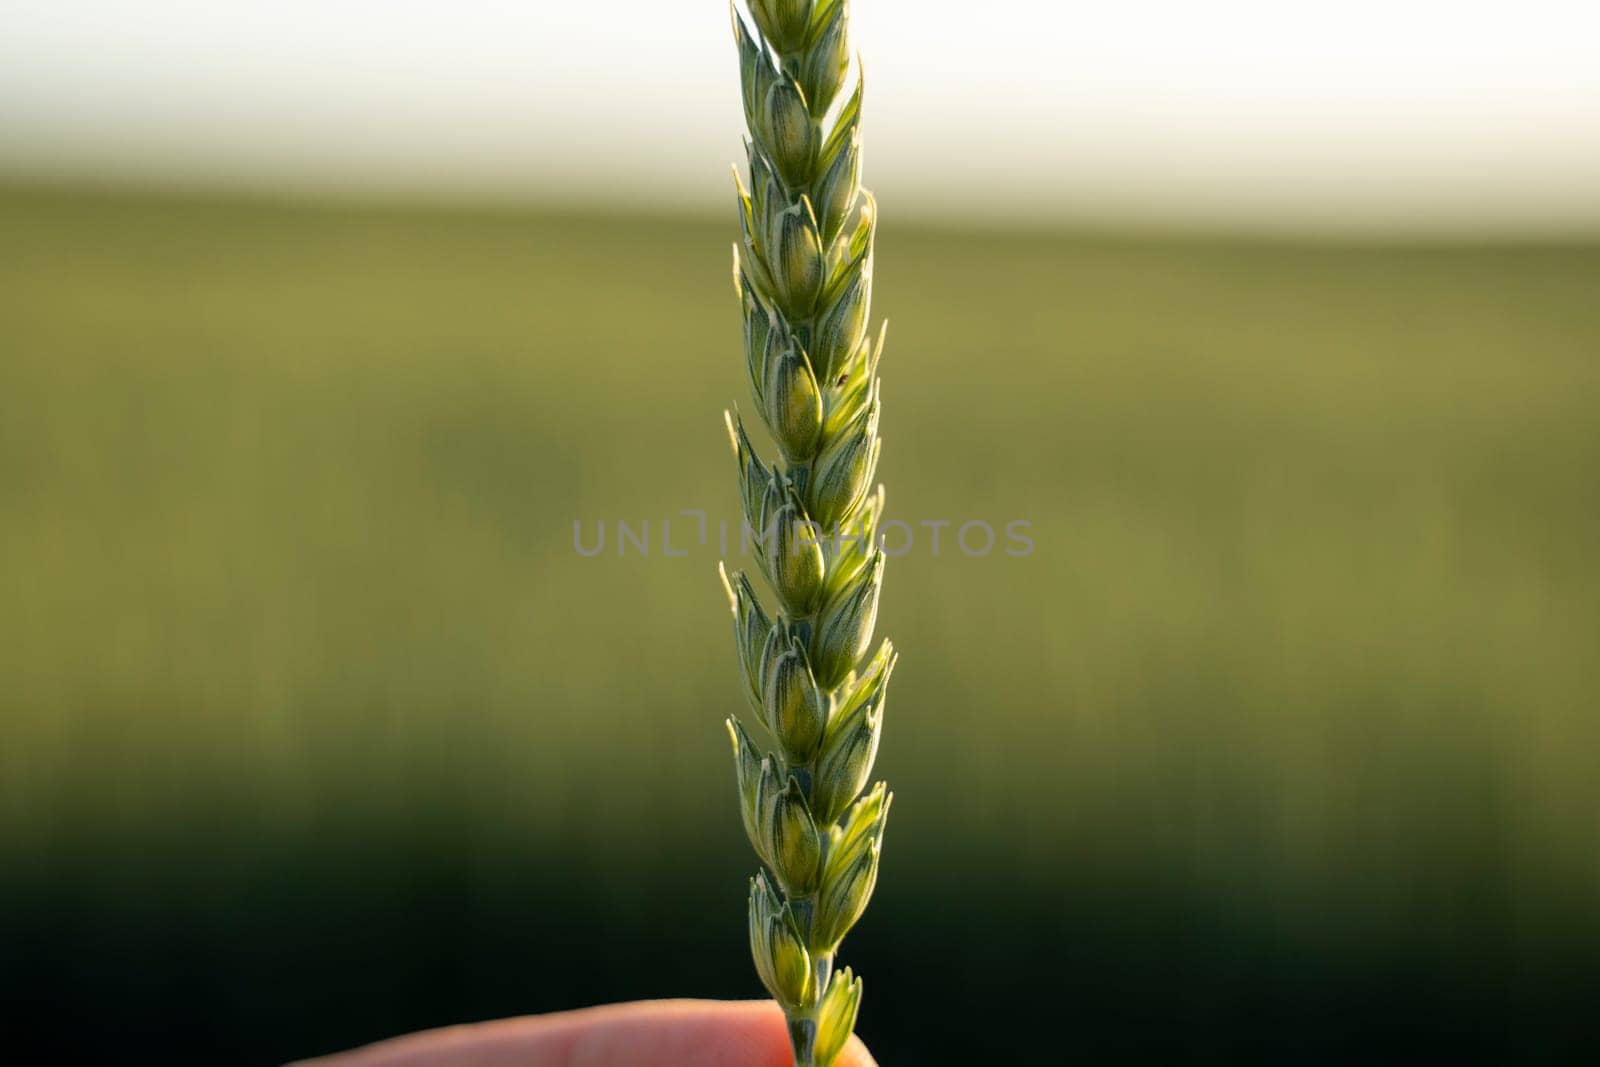 Macro green wheat ear growing in agricultural field. Green unripe cereals. The concept of agriculture, healthy eating, organic food